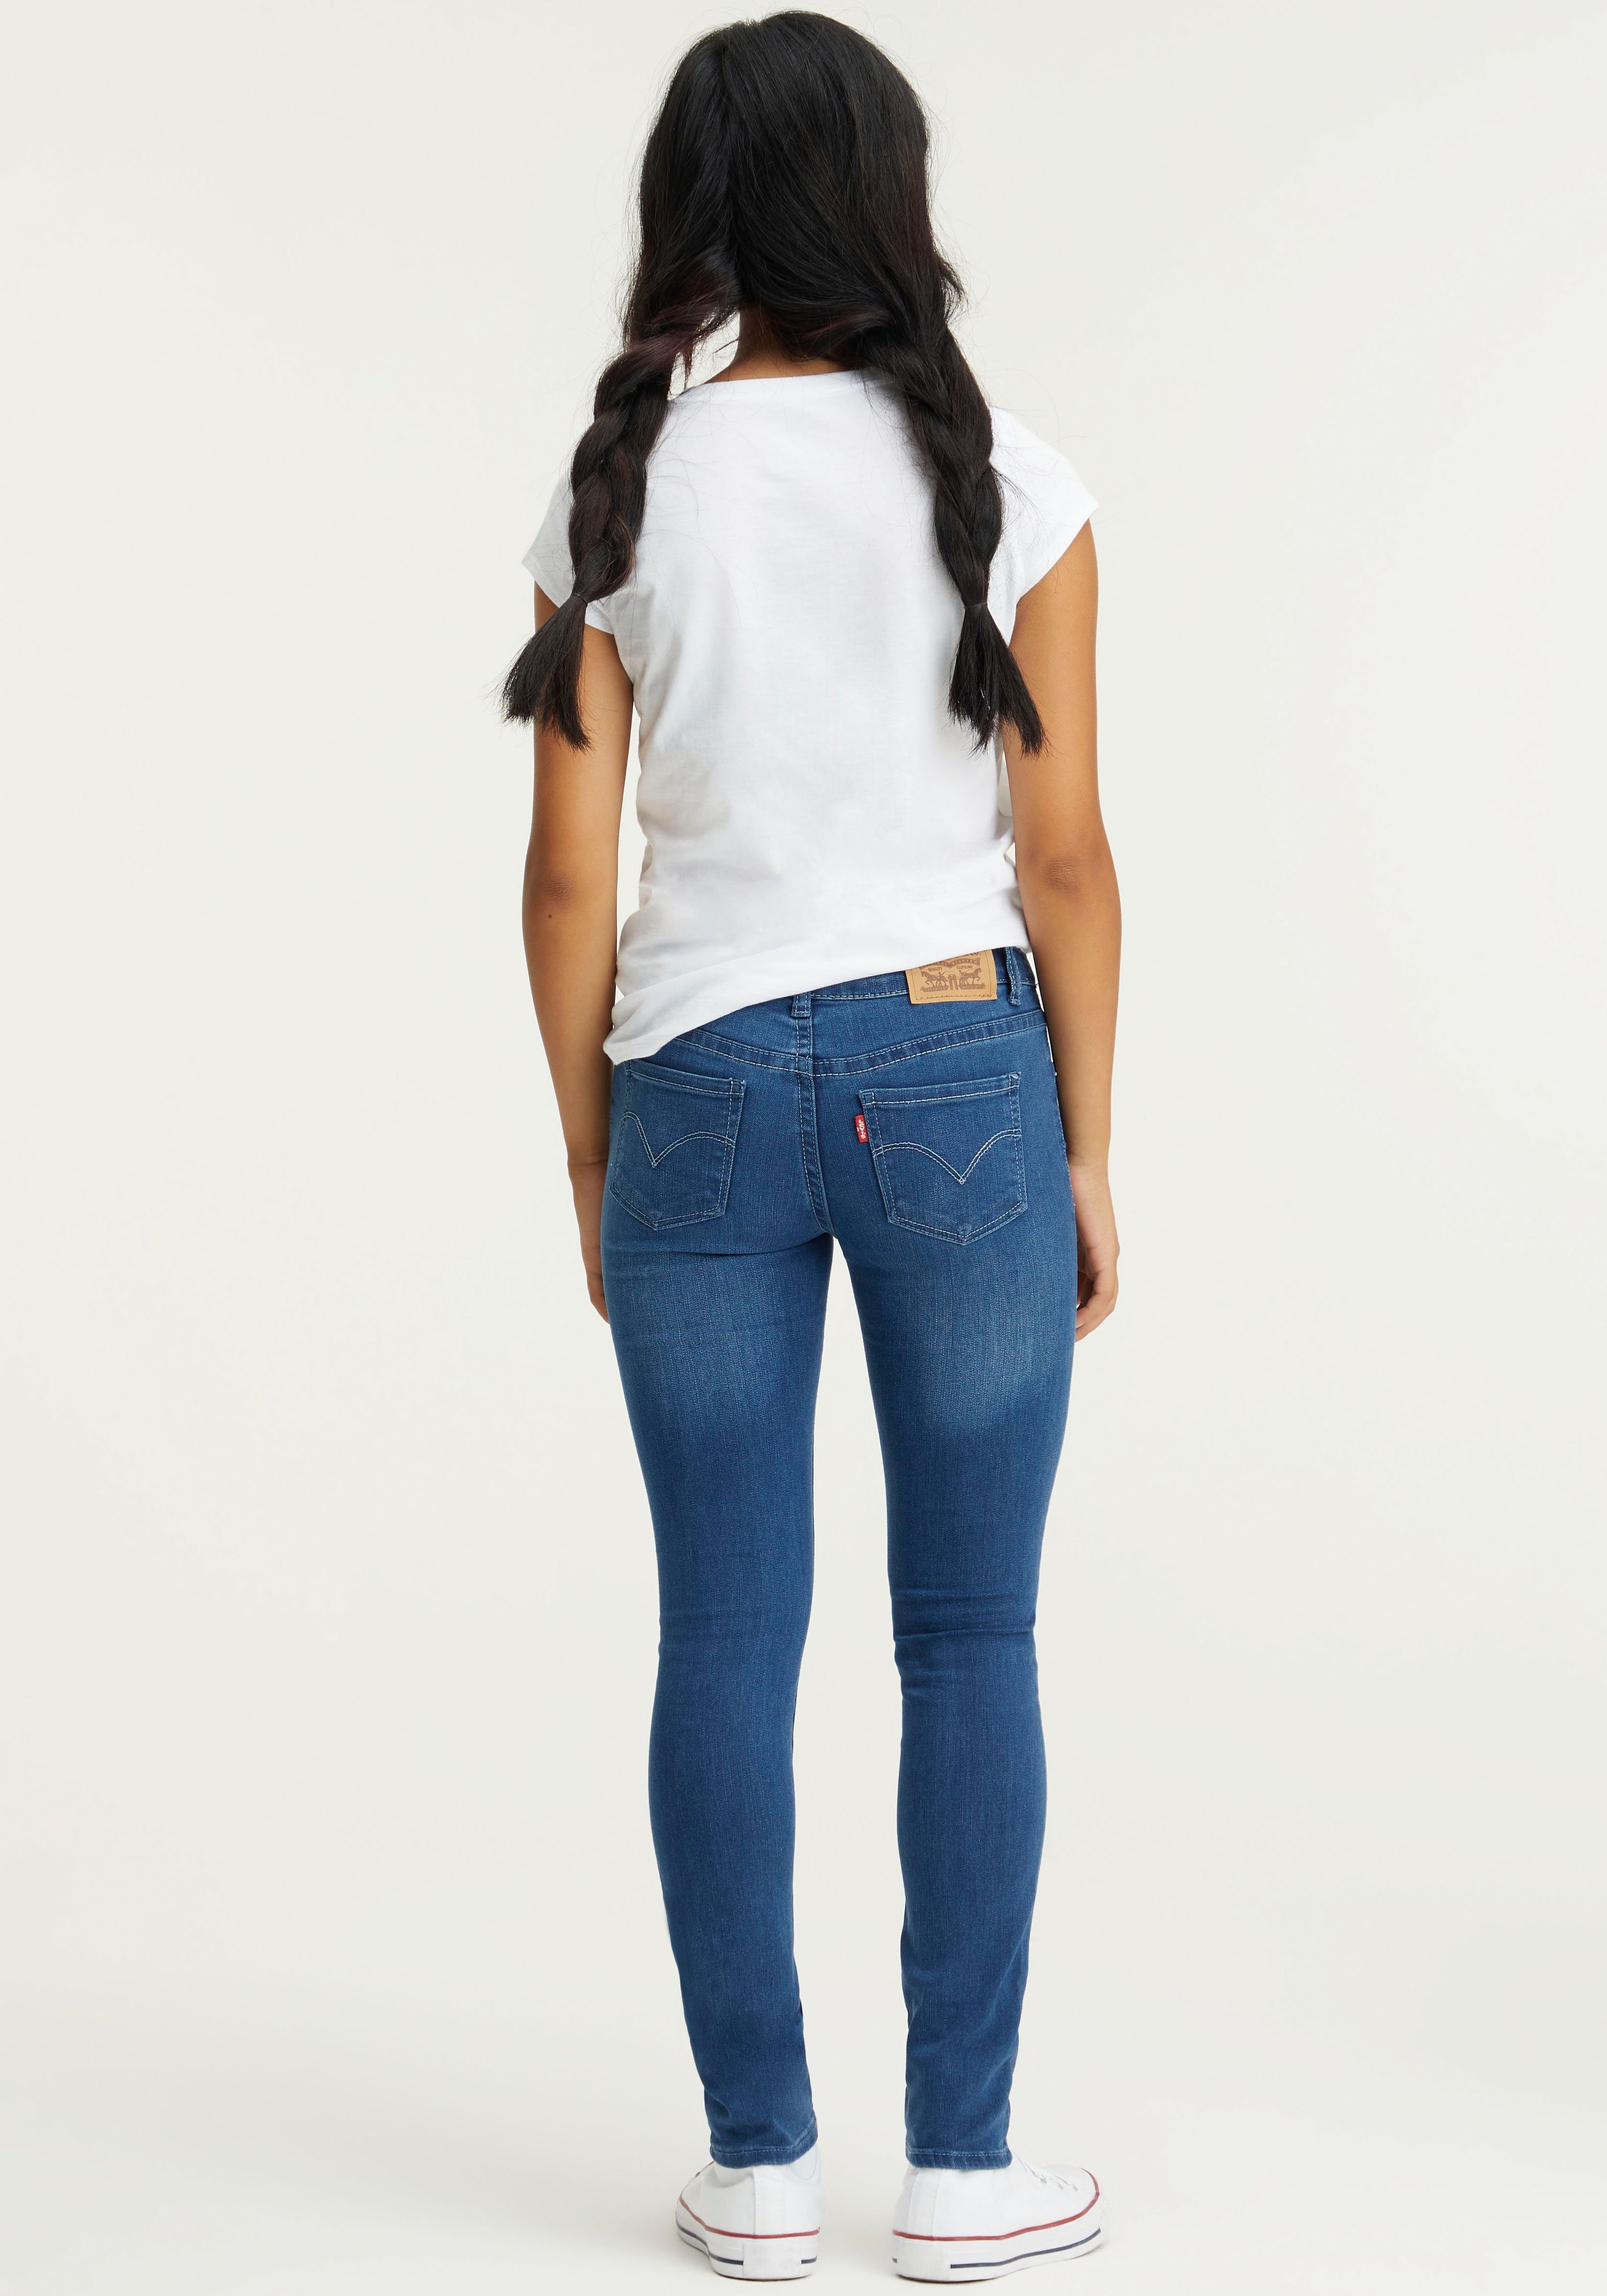 FIT Levi's® Stretch-Jeans JEANS Kids SKINNY for 711™ GIRLS